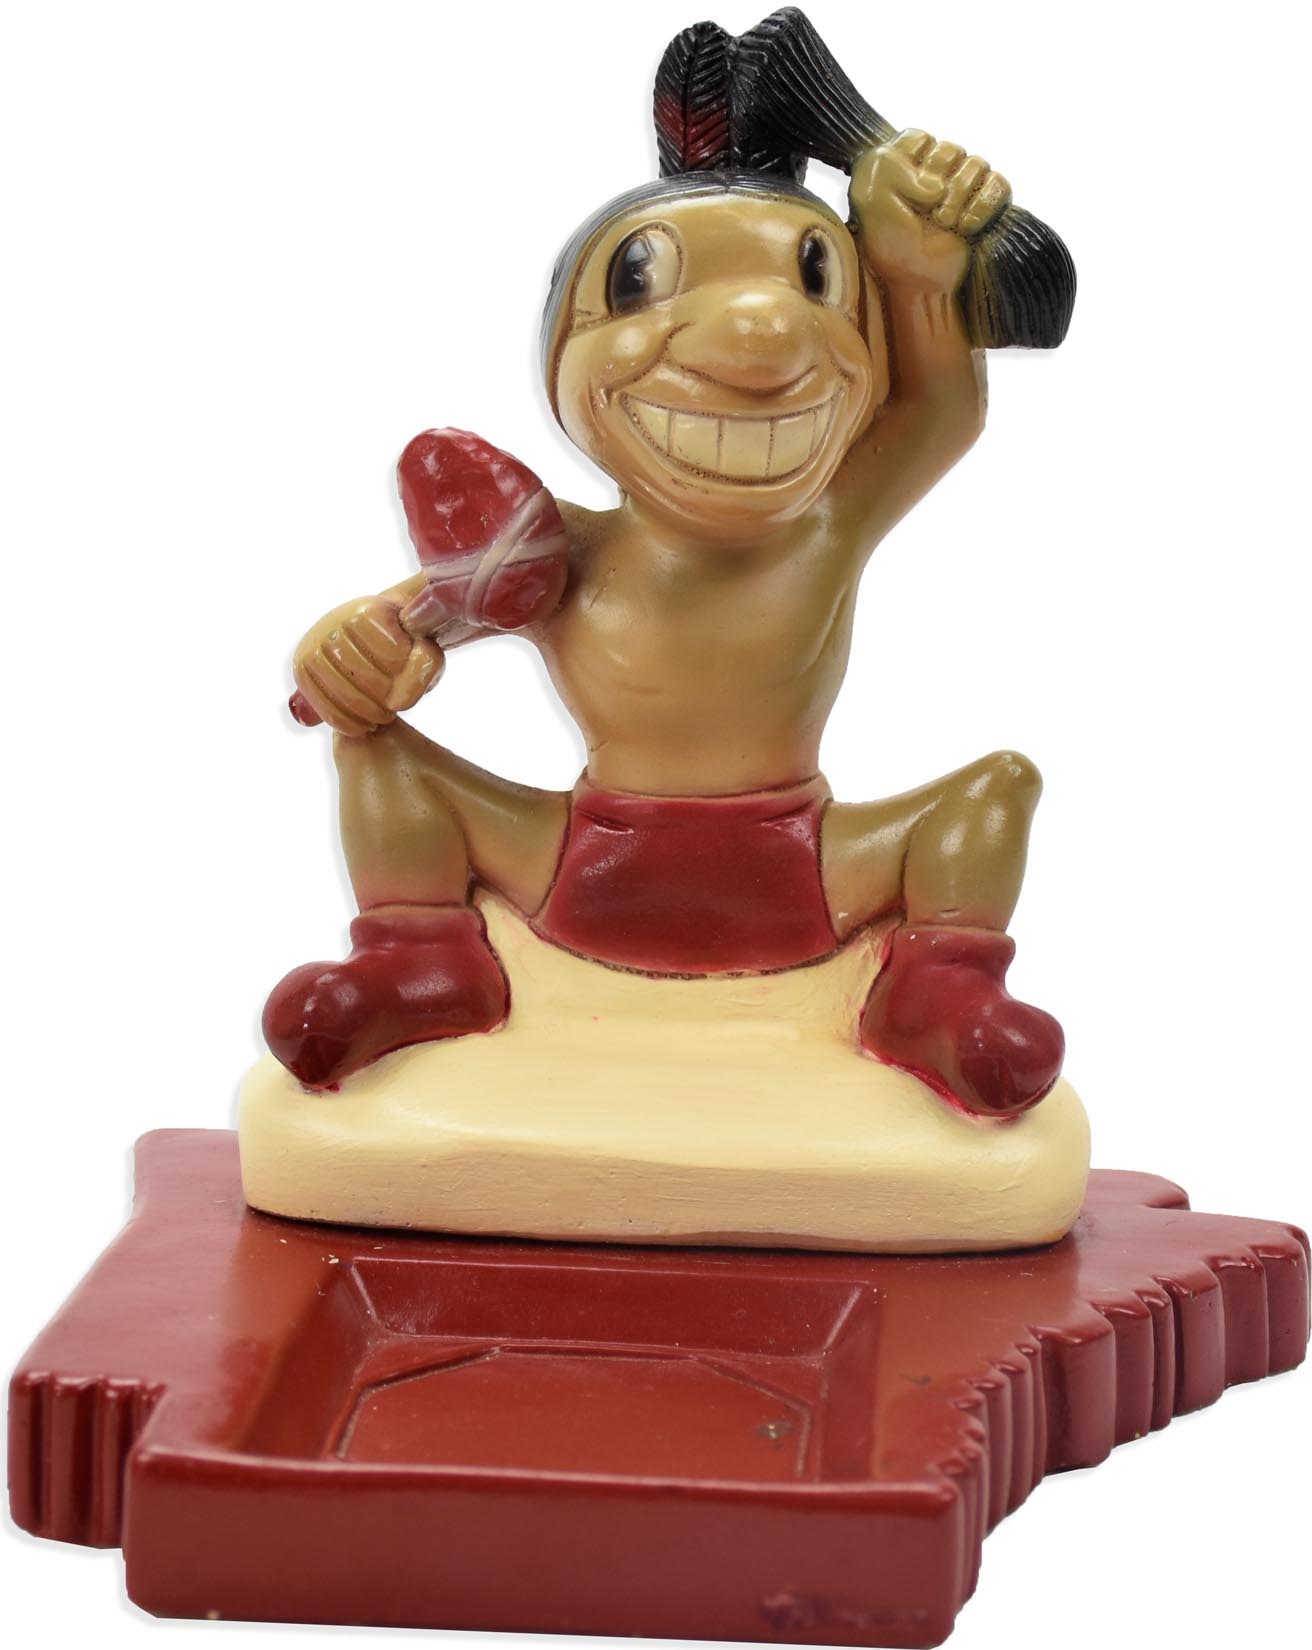 - 1940s Cleveland Indians Chief Wahoo "State of Ohio Ashtray"